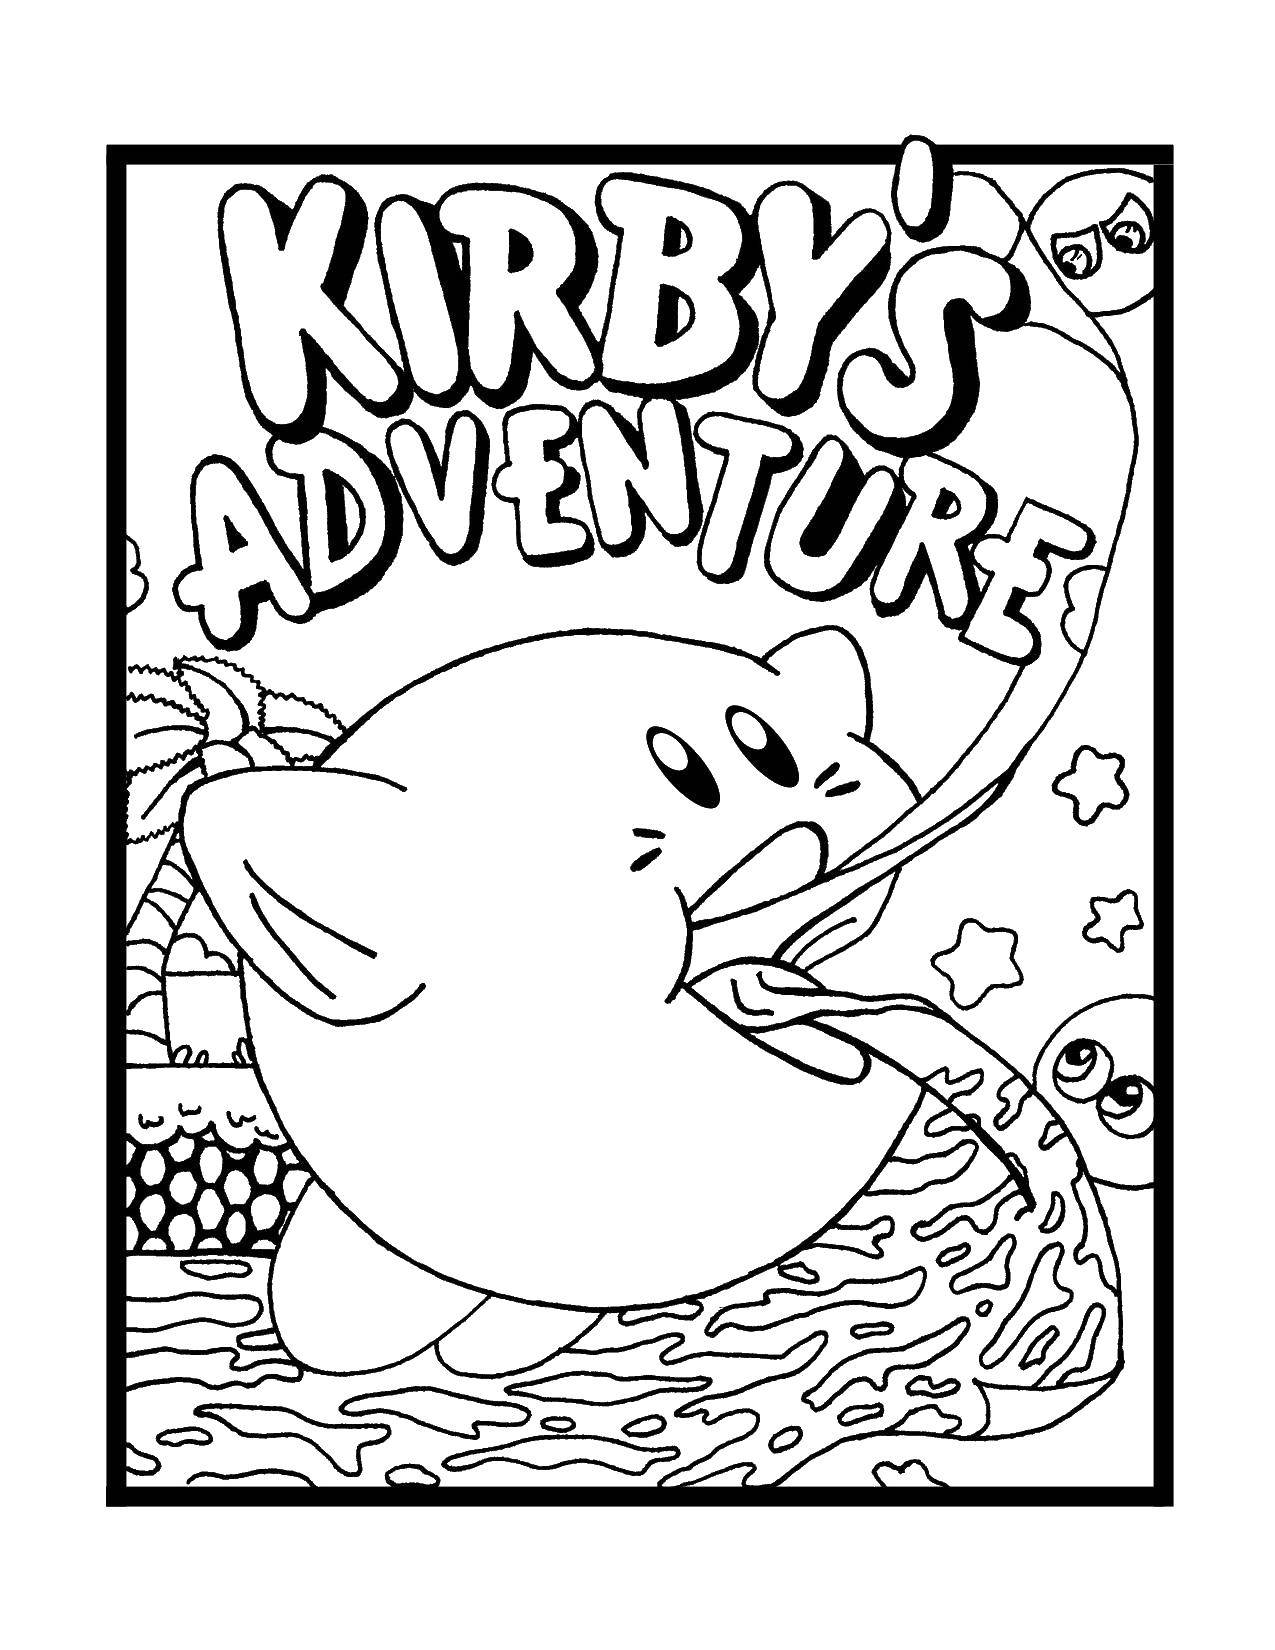 Coloring Asterisk Kirby. Category Kirby. Tags:  Star Kirby.